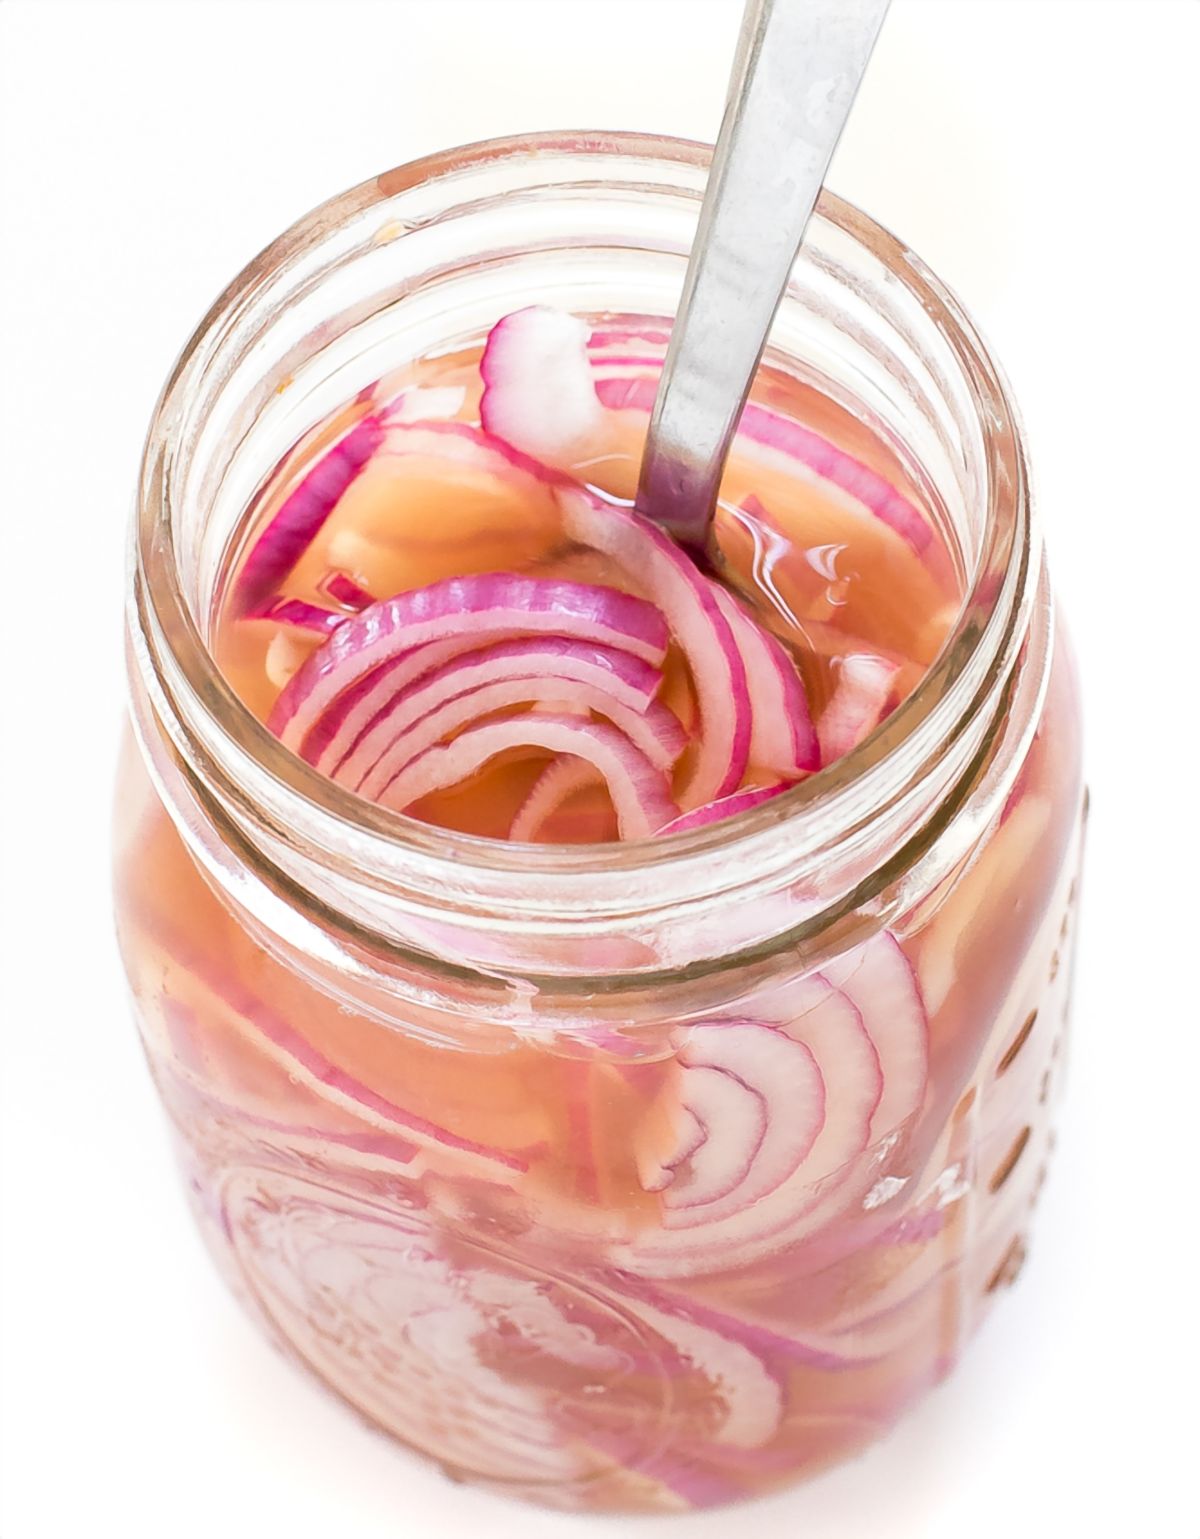 Homemade Pickled Red Onions